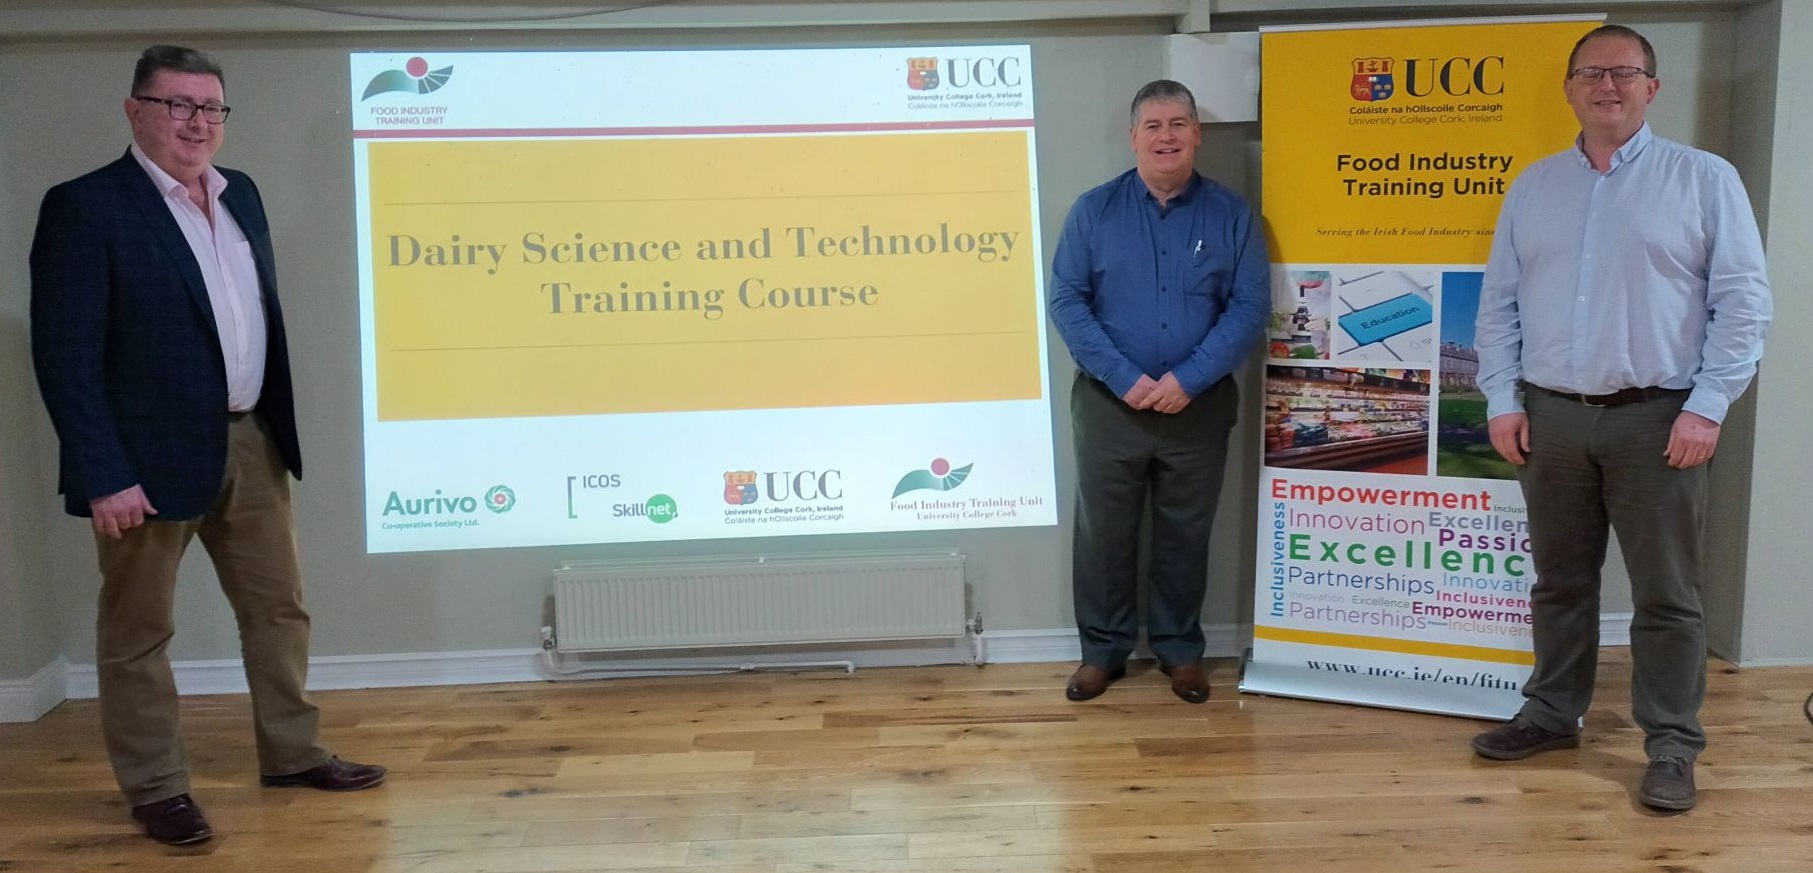 Aurivo have partnered with University College Cork (UCC) for their Dairy Science and Technology training requirements